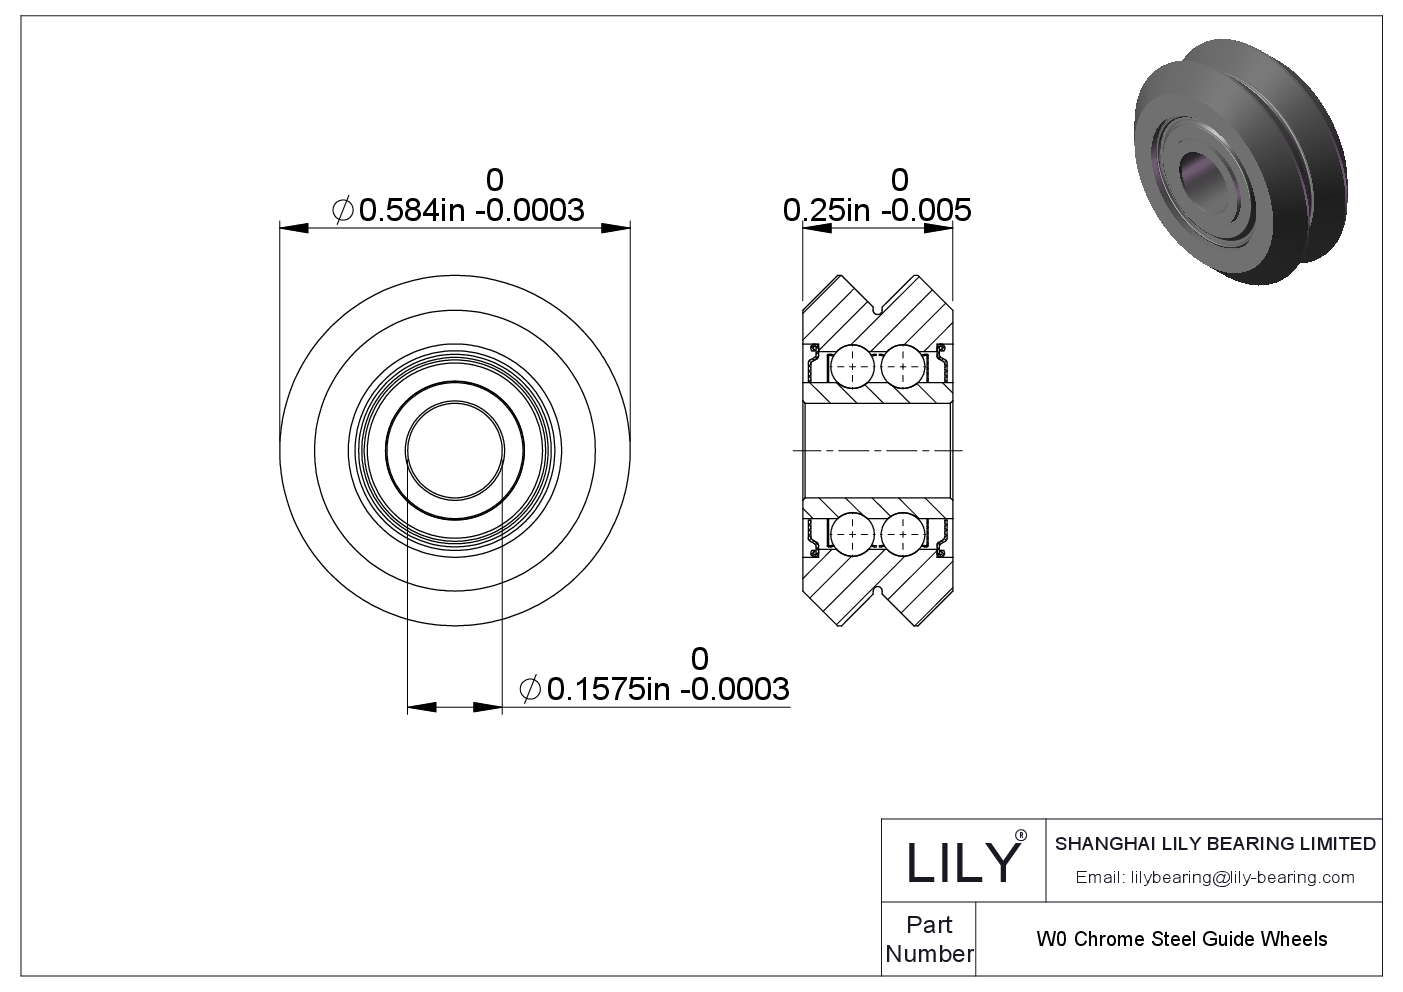 W0 Chrome Steel Guide Wheels cad drawing